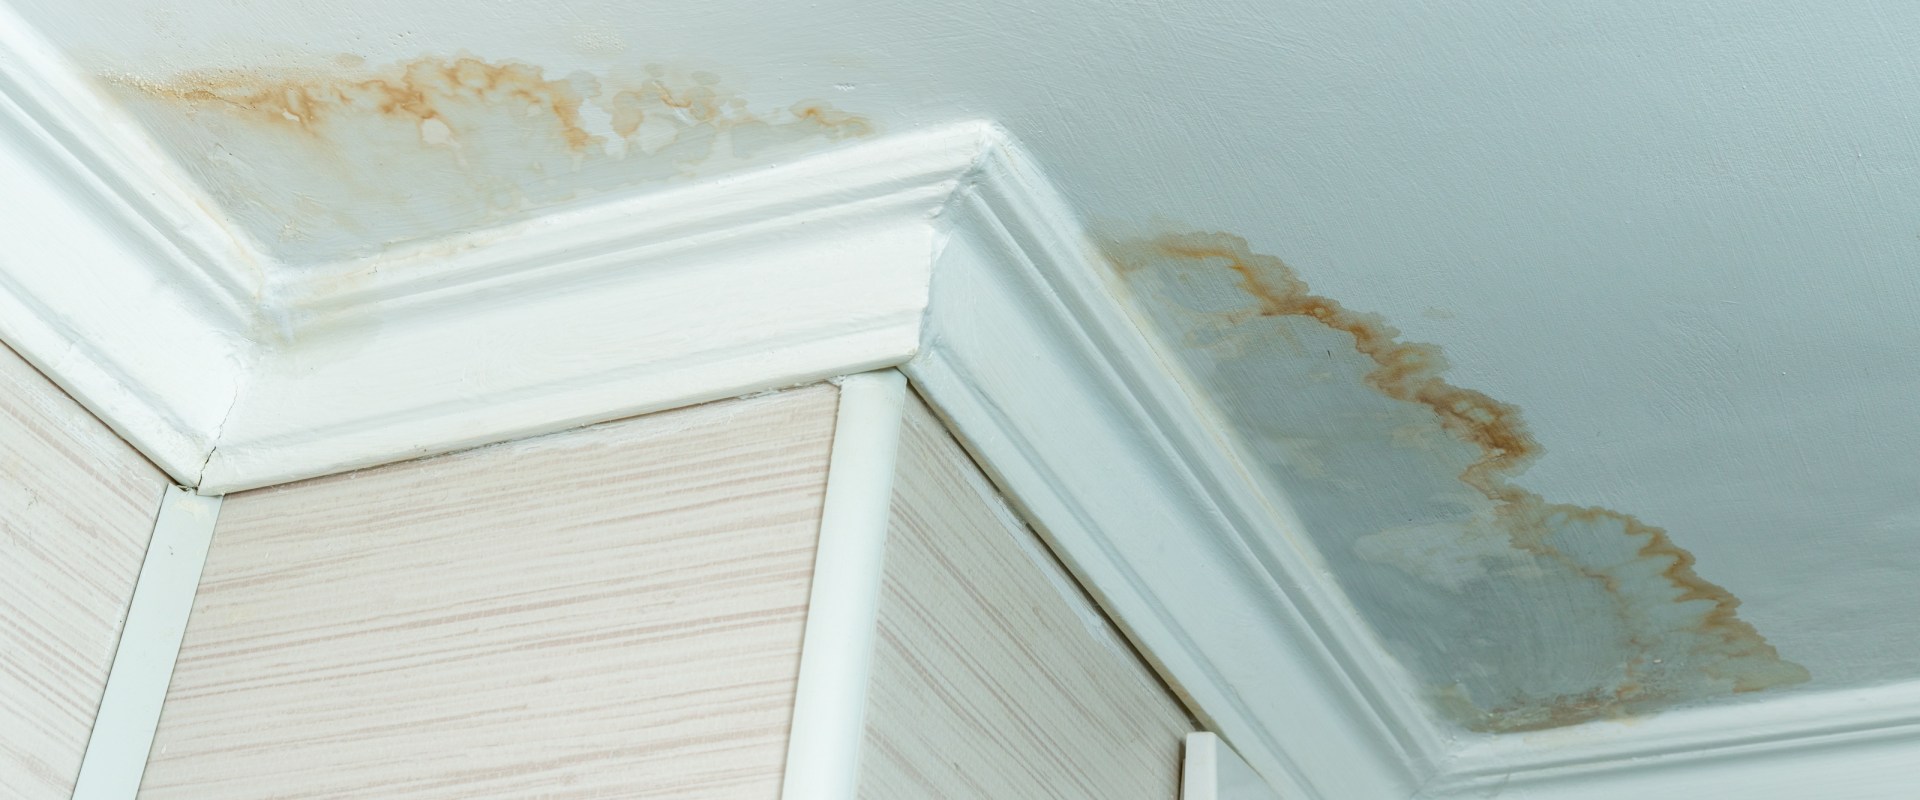 Can You Paint Over Water Damaged Plaster?